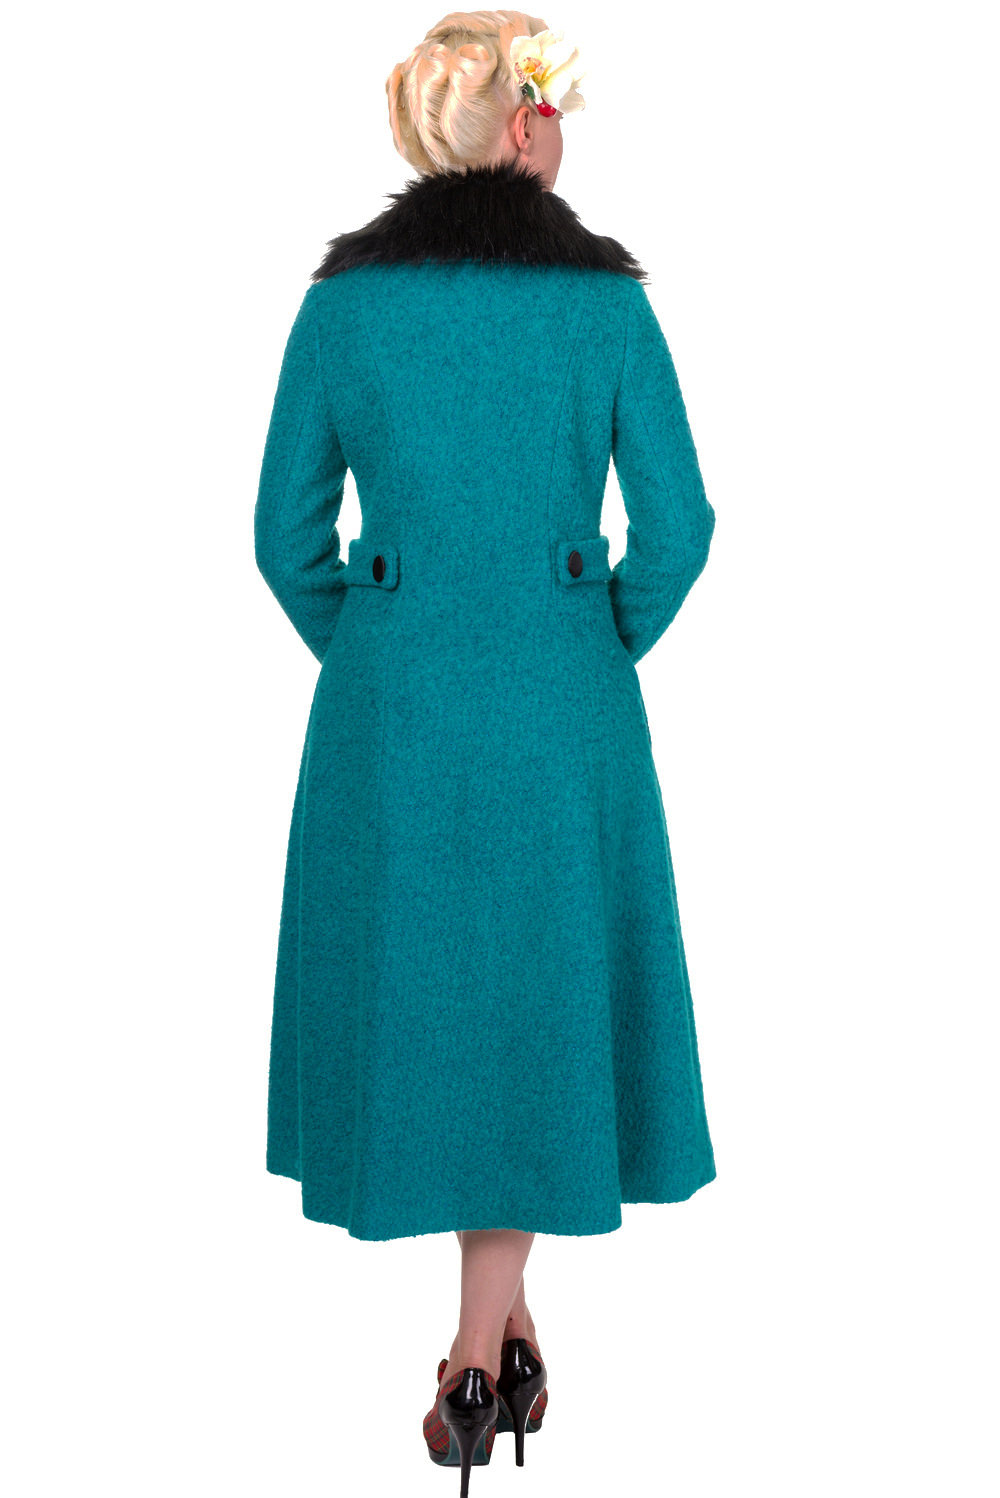 Banned By Dancing Days Simple Game Emerald Winter Coat